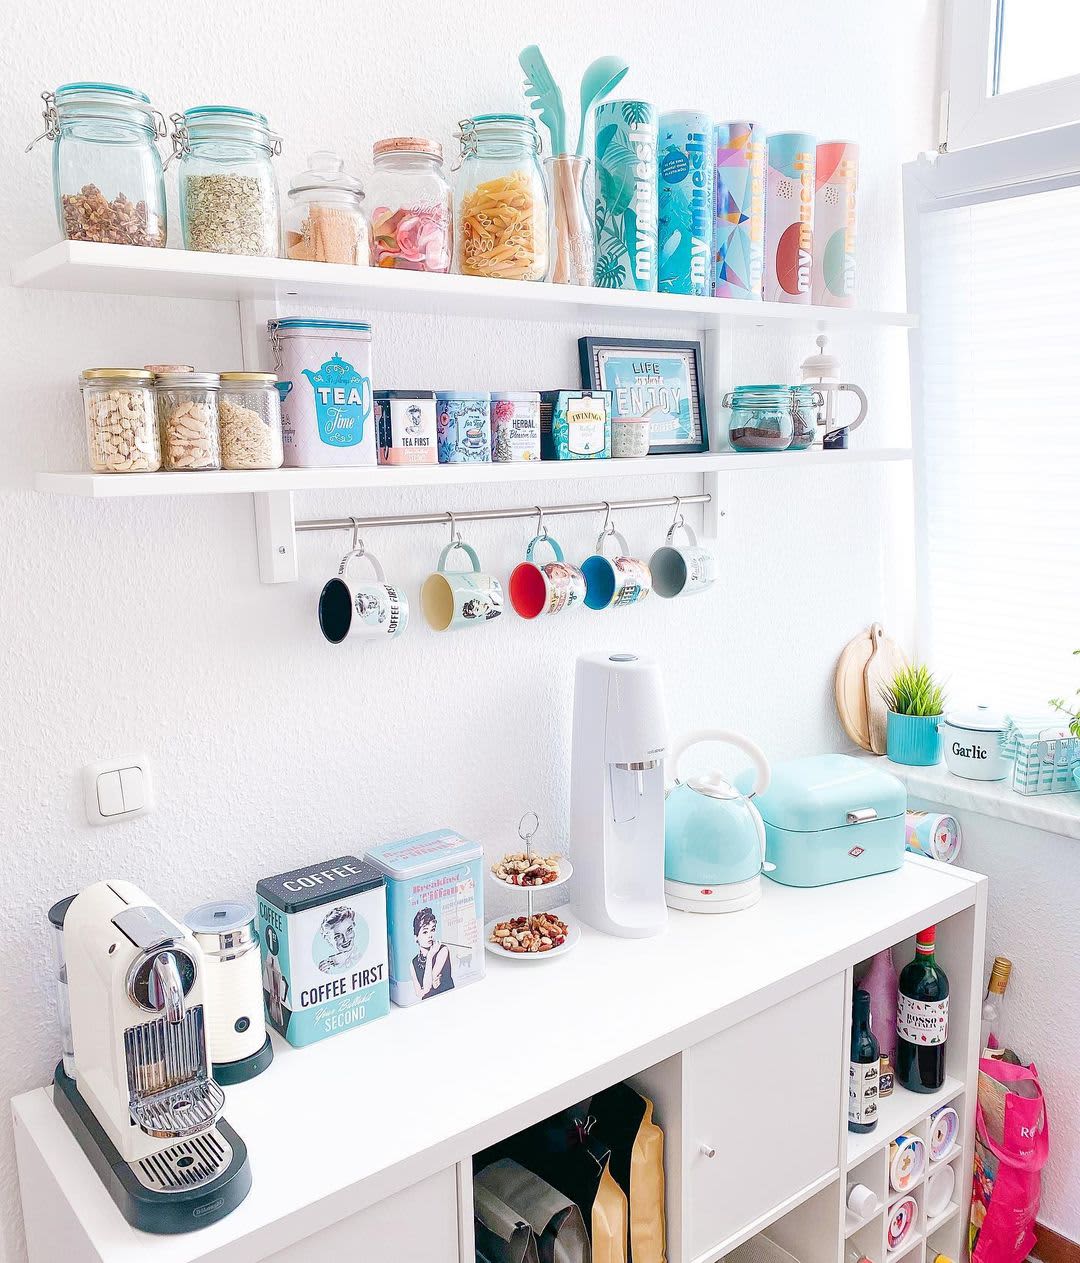 11 DIY Storage Ideas for the Small and Space-Savvy Kitchen